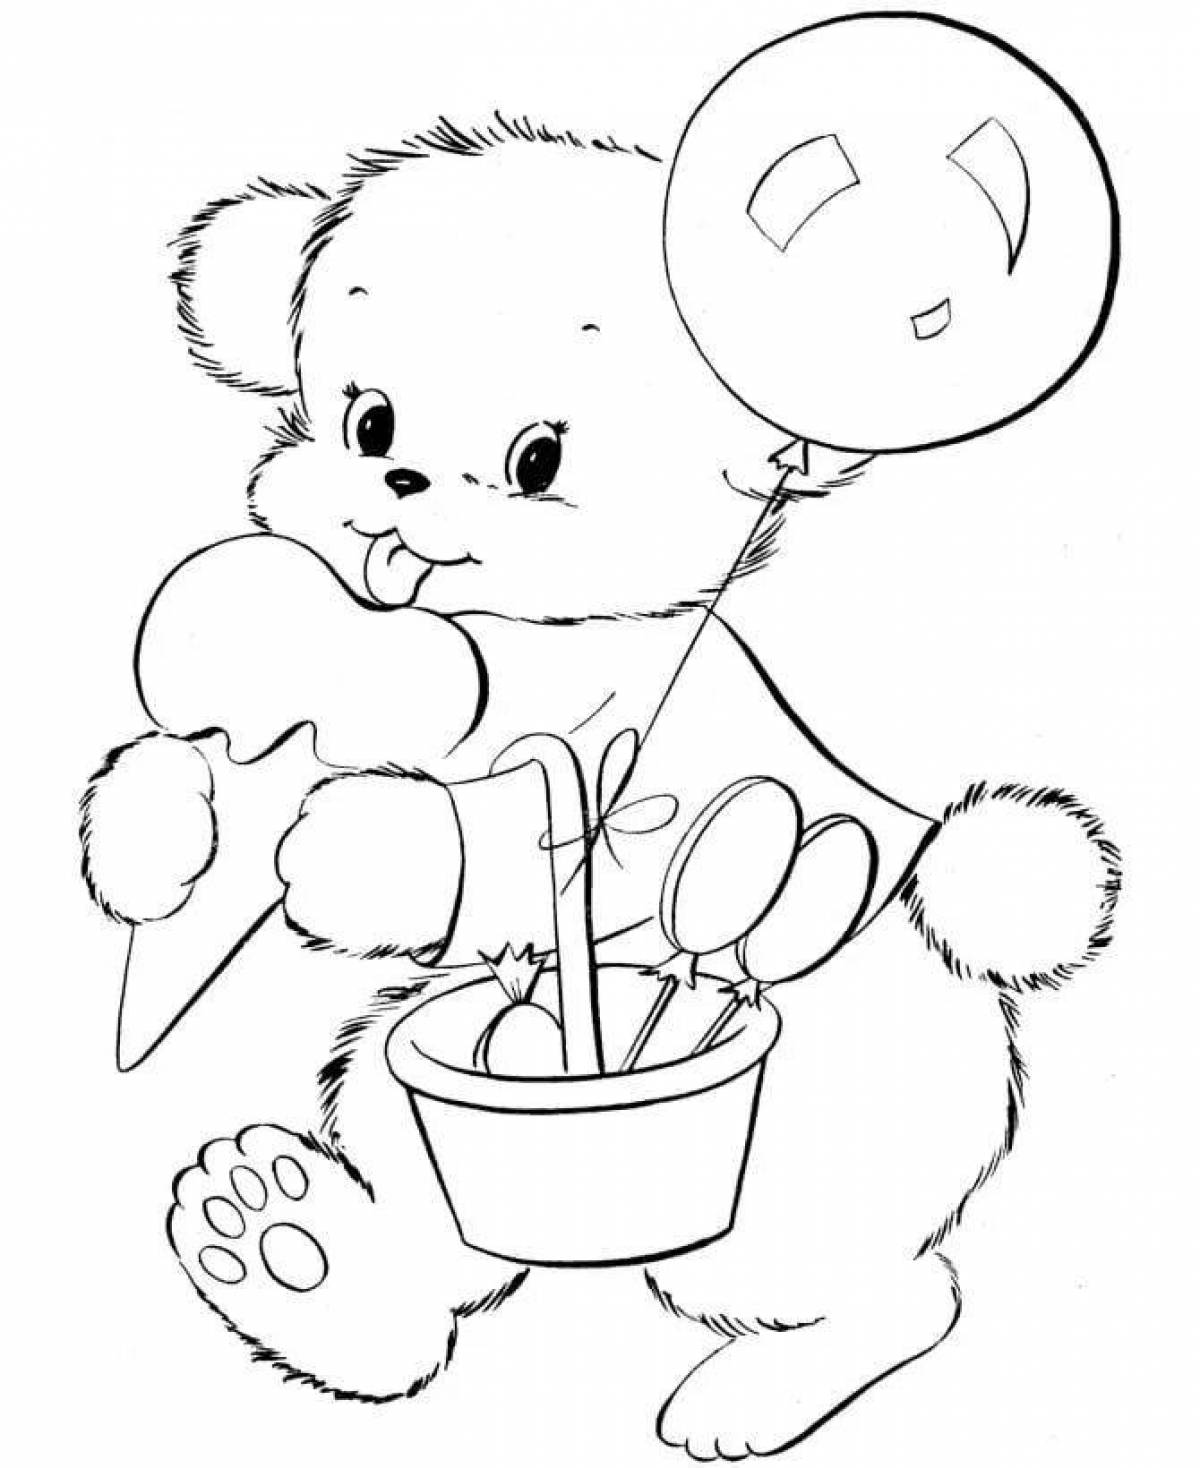 Coloring playful teddy